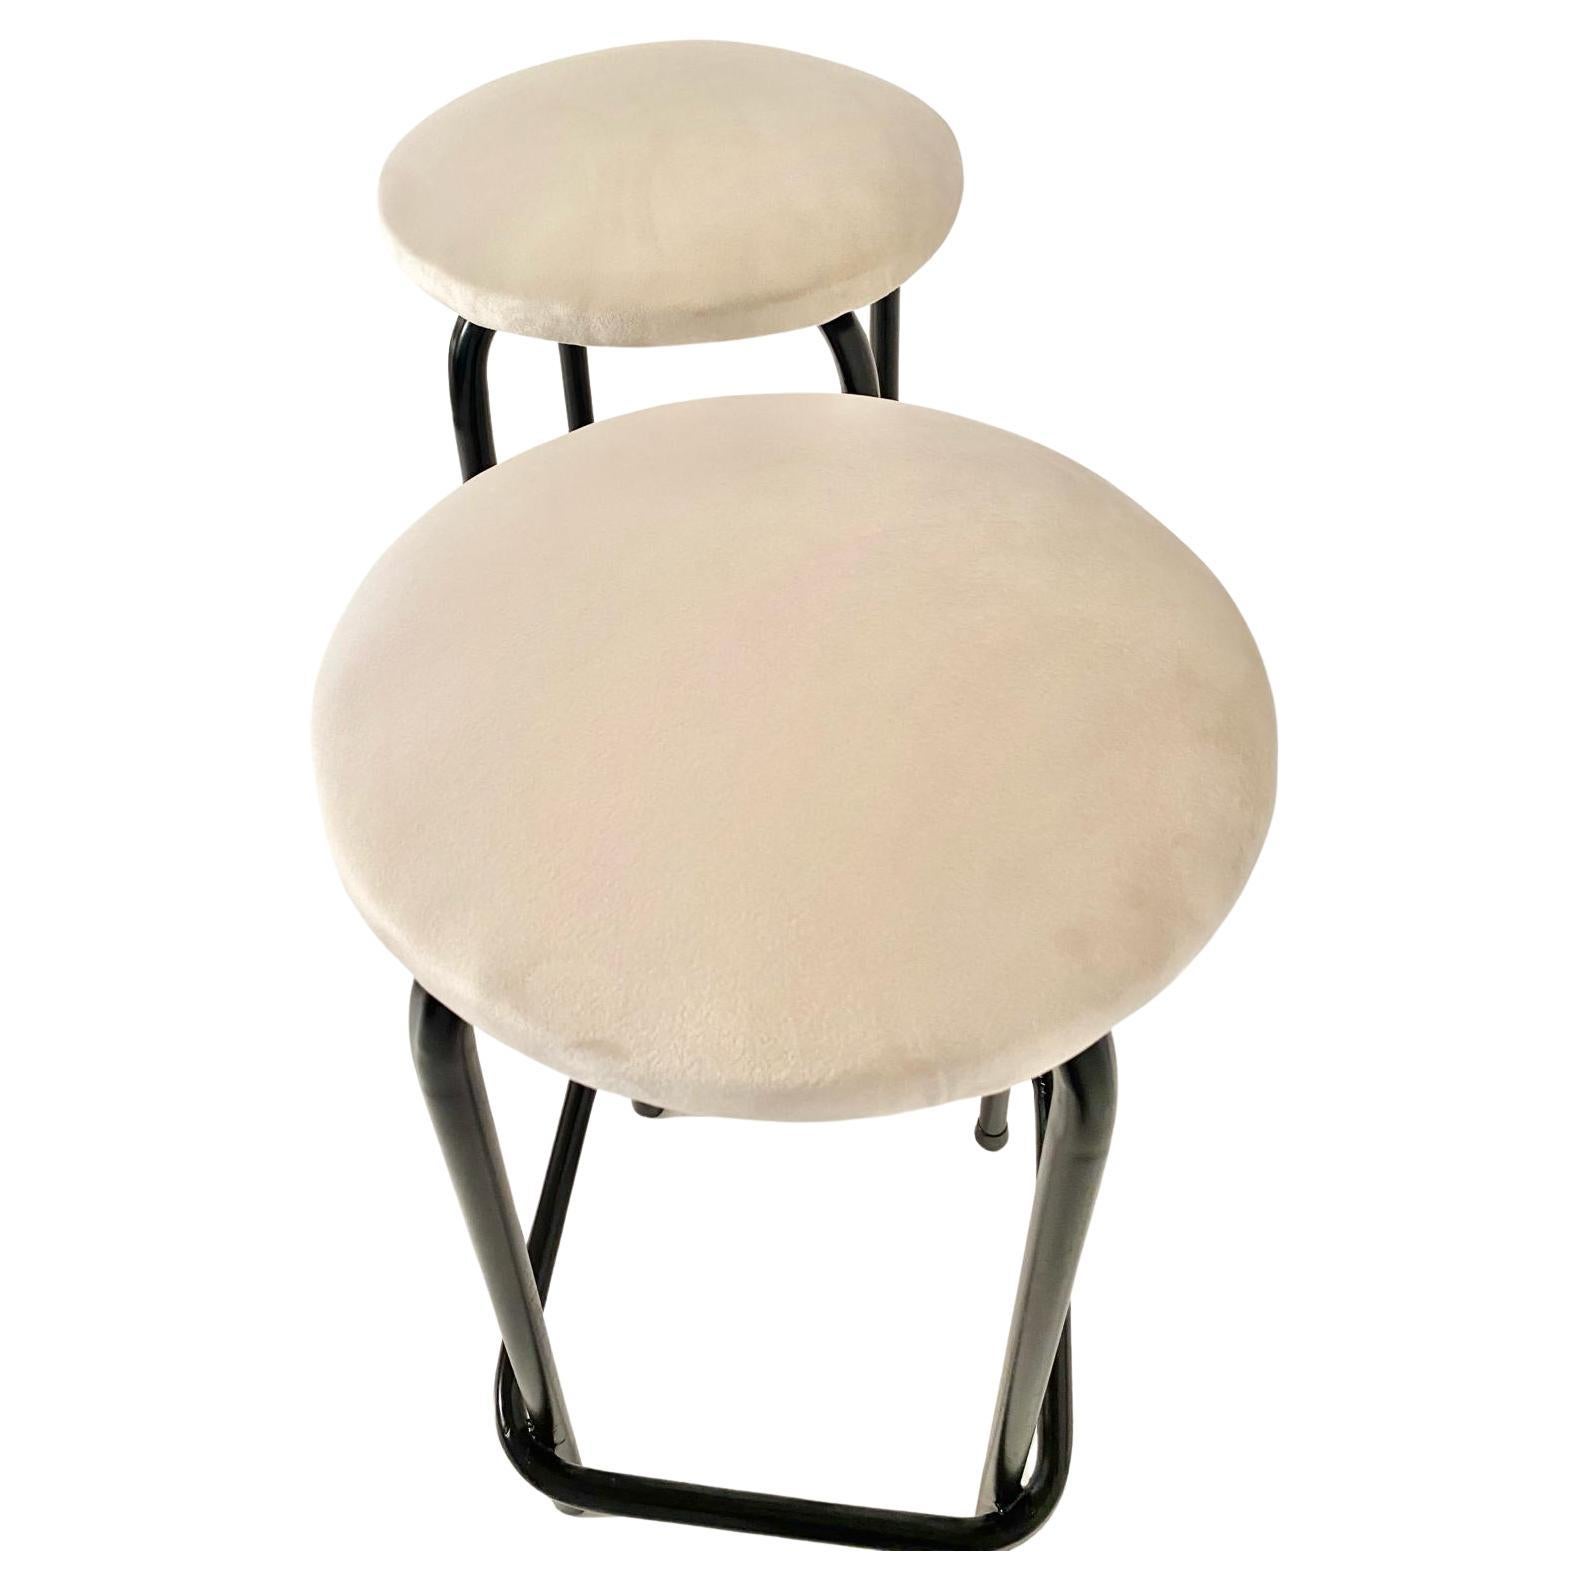 Midcentury Modern Industrial Iron and Velvet Stools, Set of Two, Italy 1960s For Sale 1